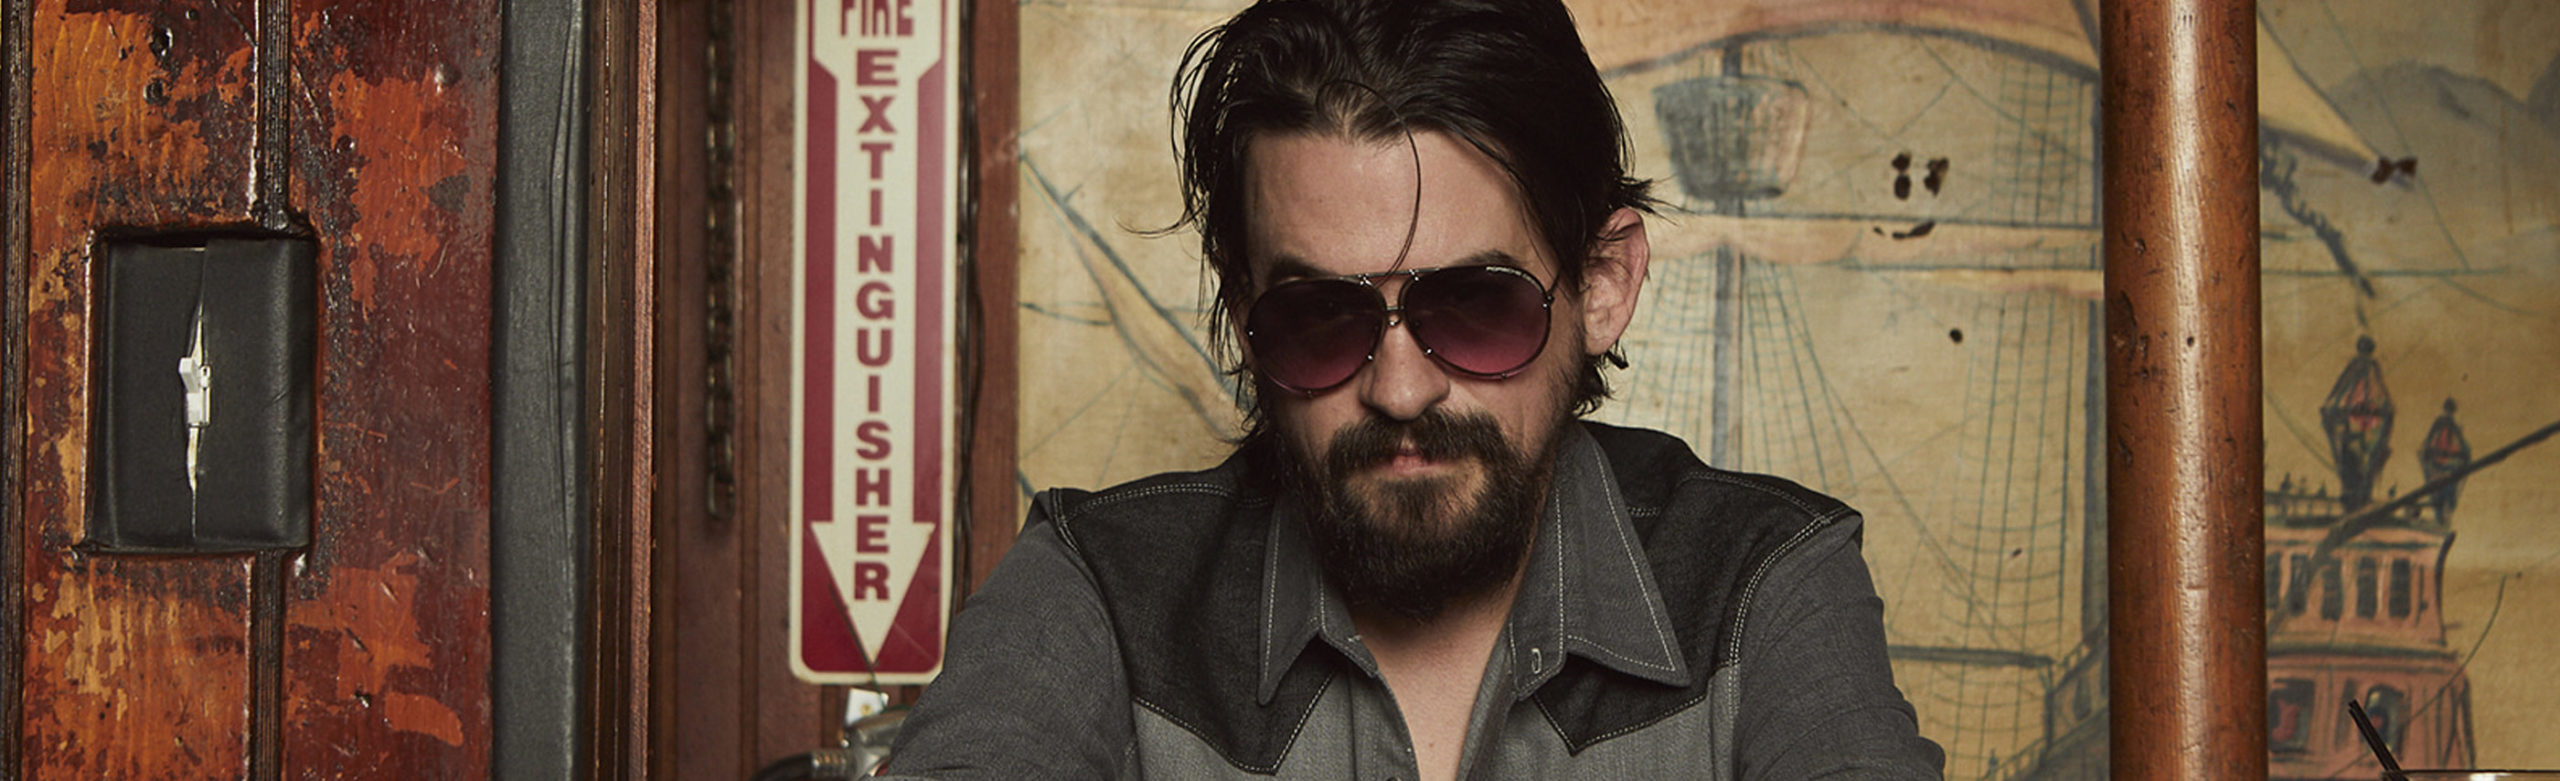 Event Info: Shooter Jennings at the Rialto 2020 Image